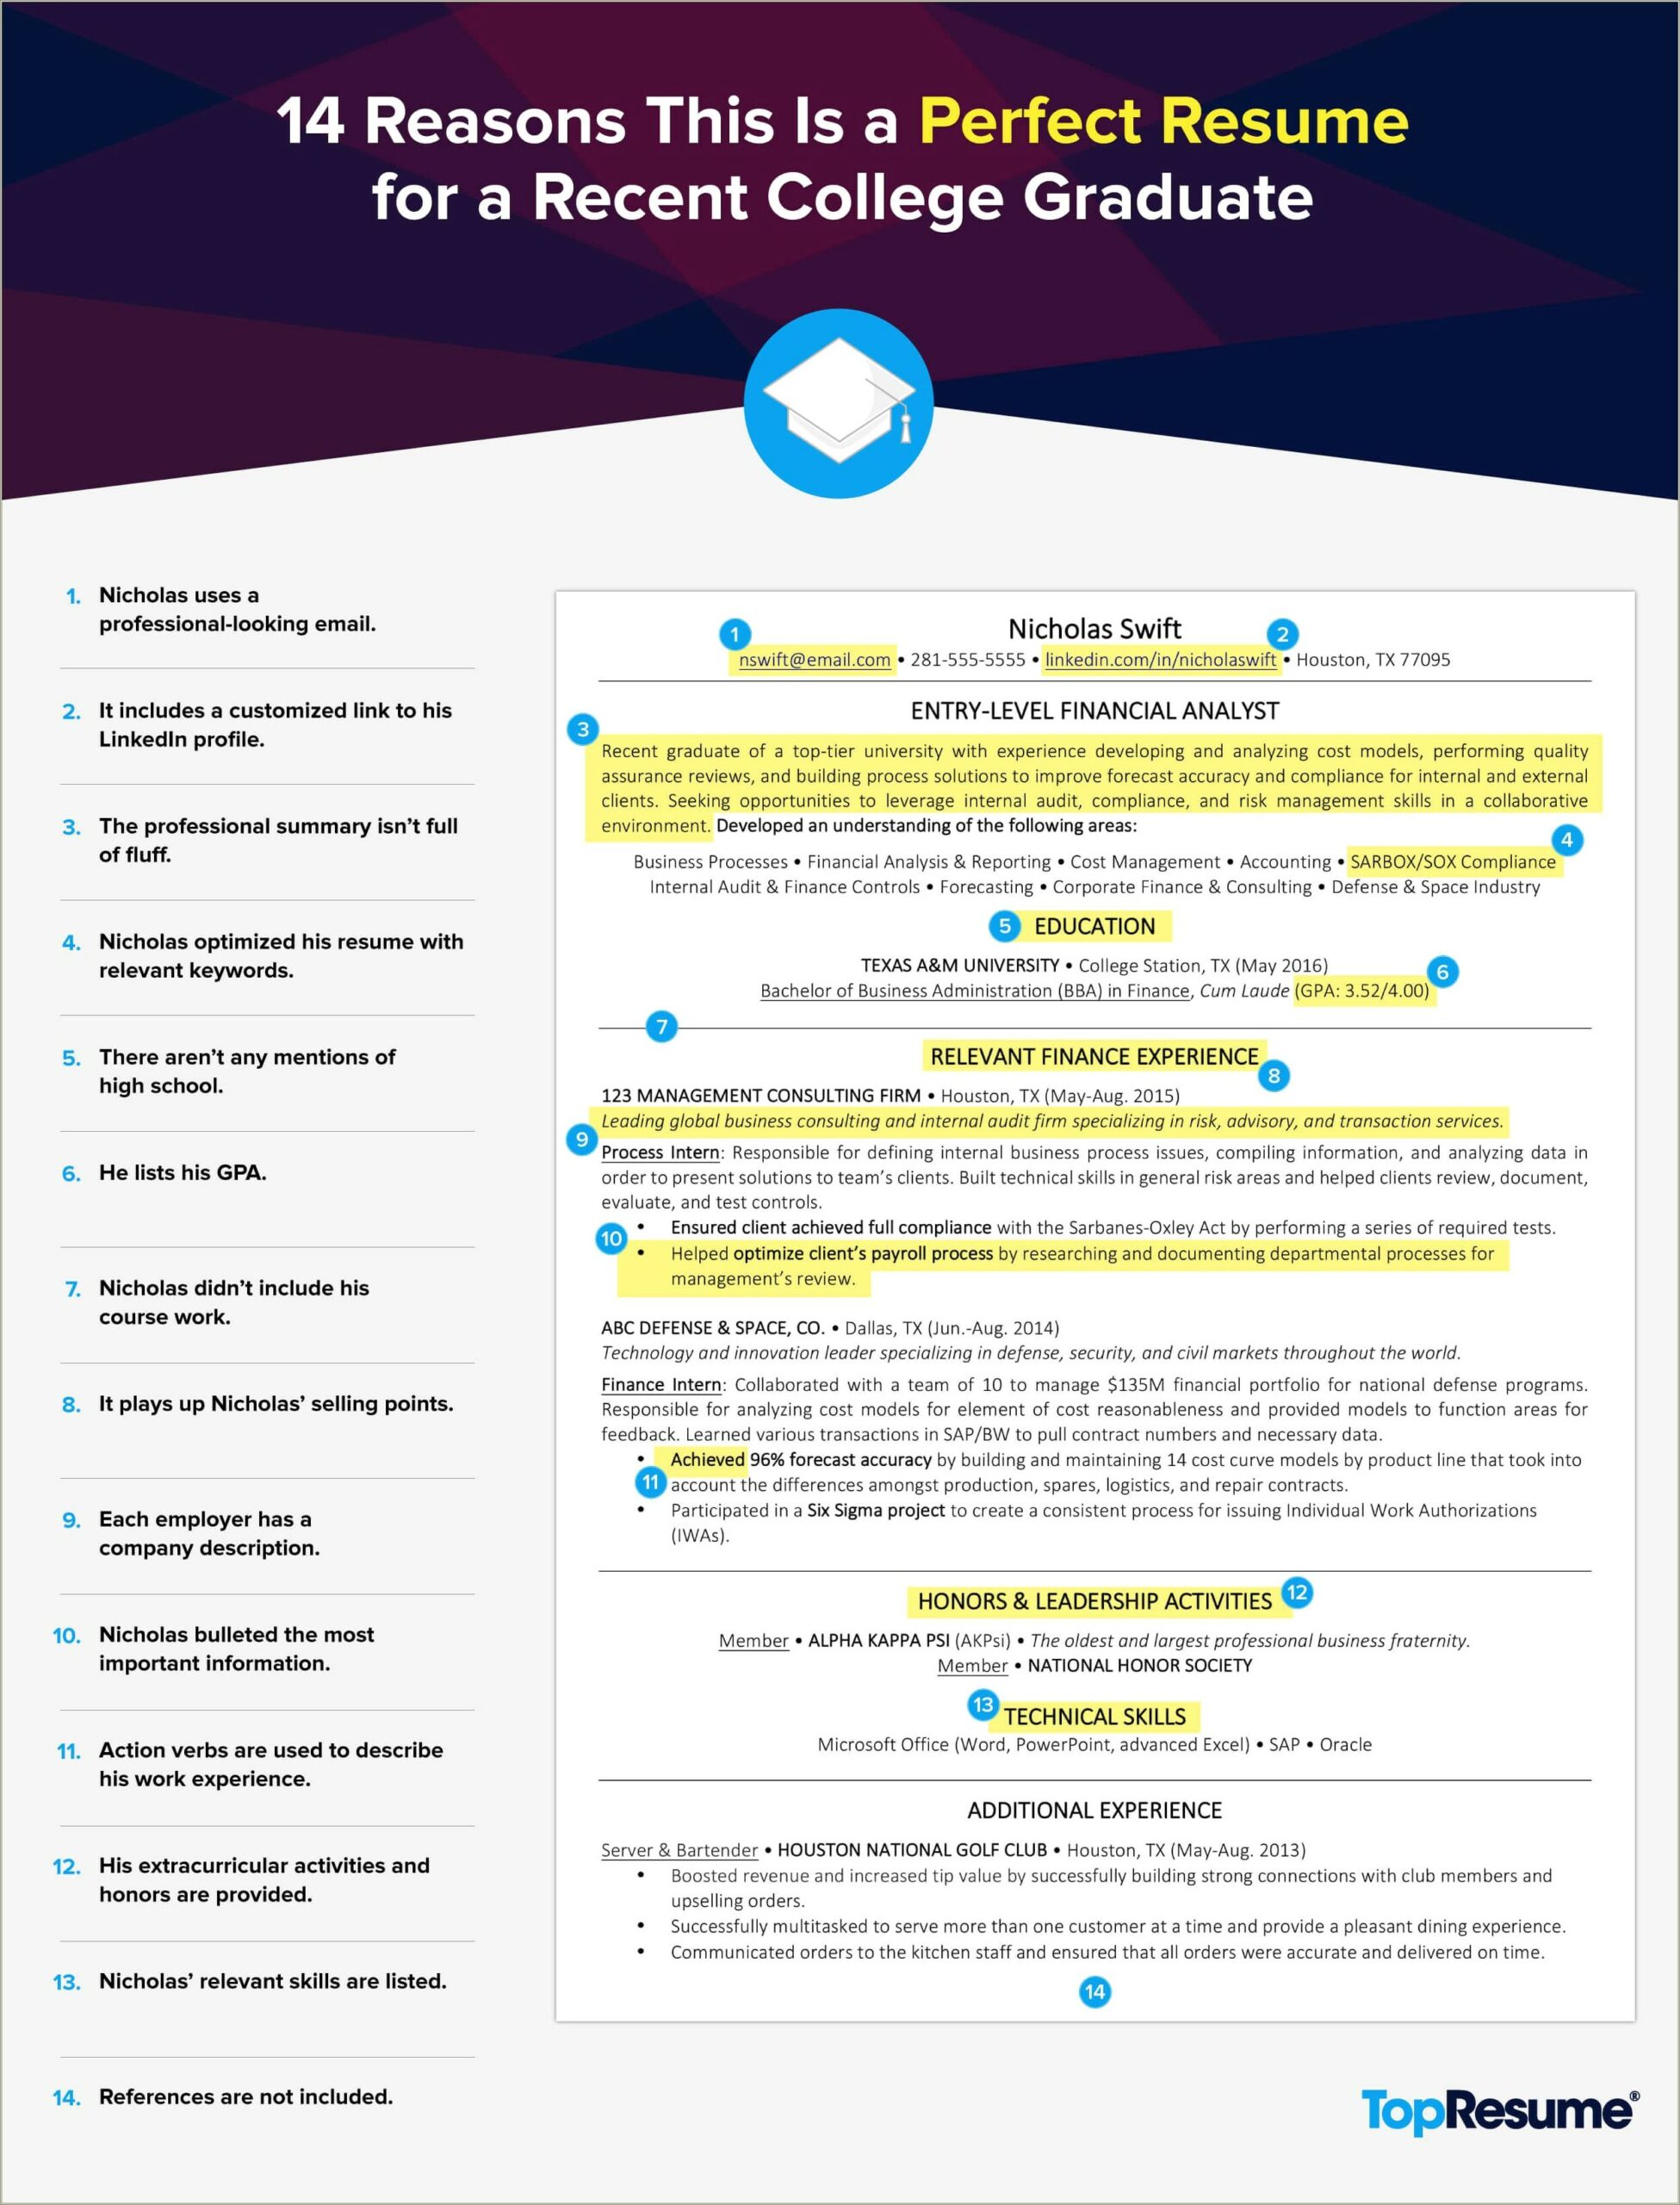 Resume Objective Examples For Fresh Graduates